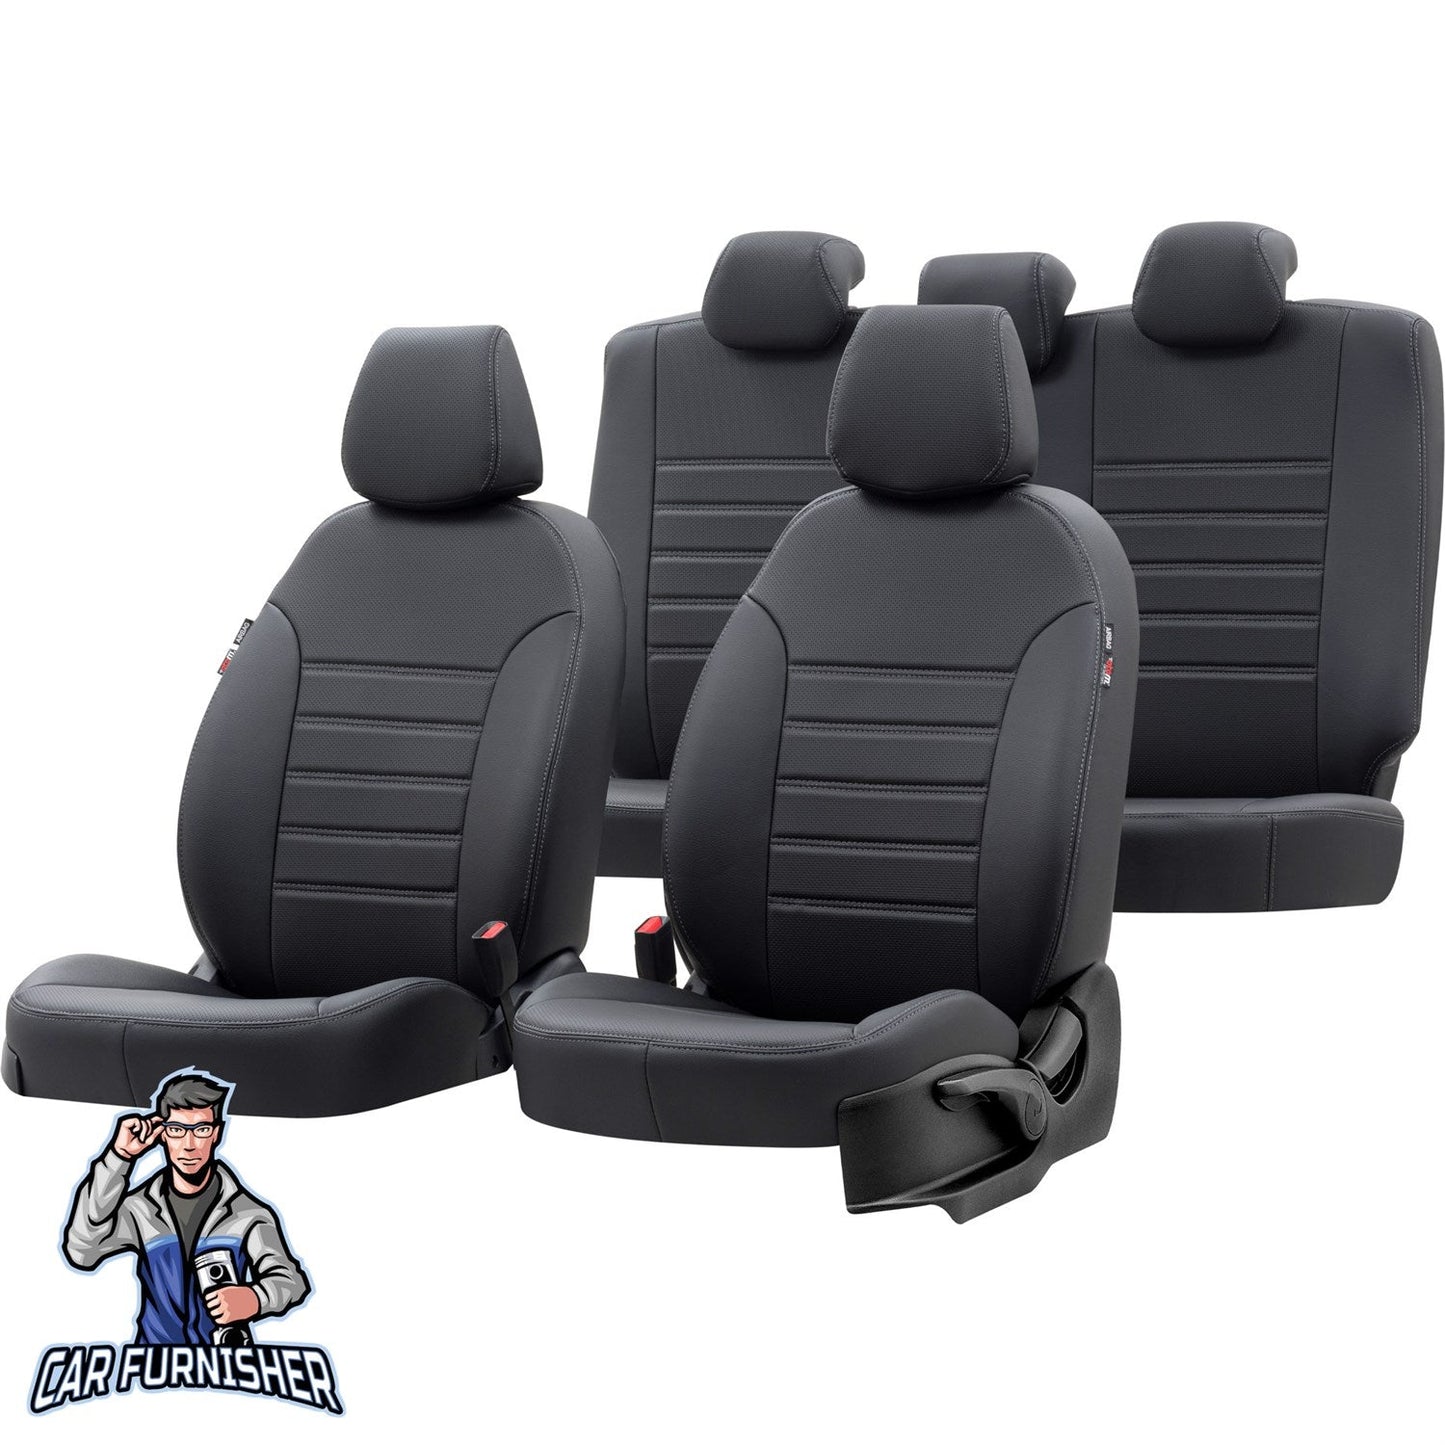 Volkswagen Beetle Seat Cover New York Leather Design Black Leather